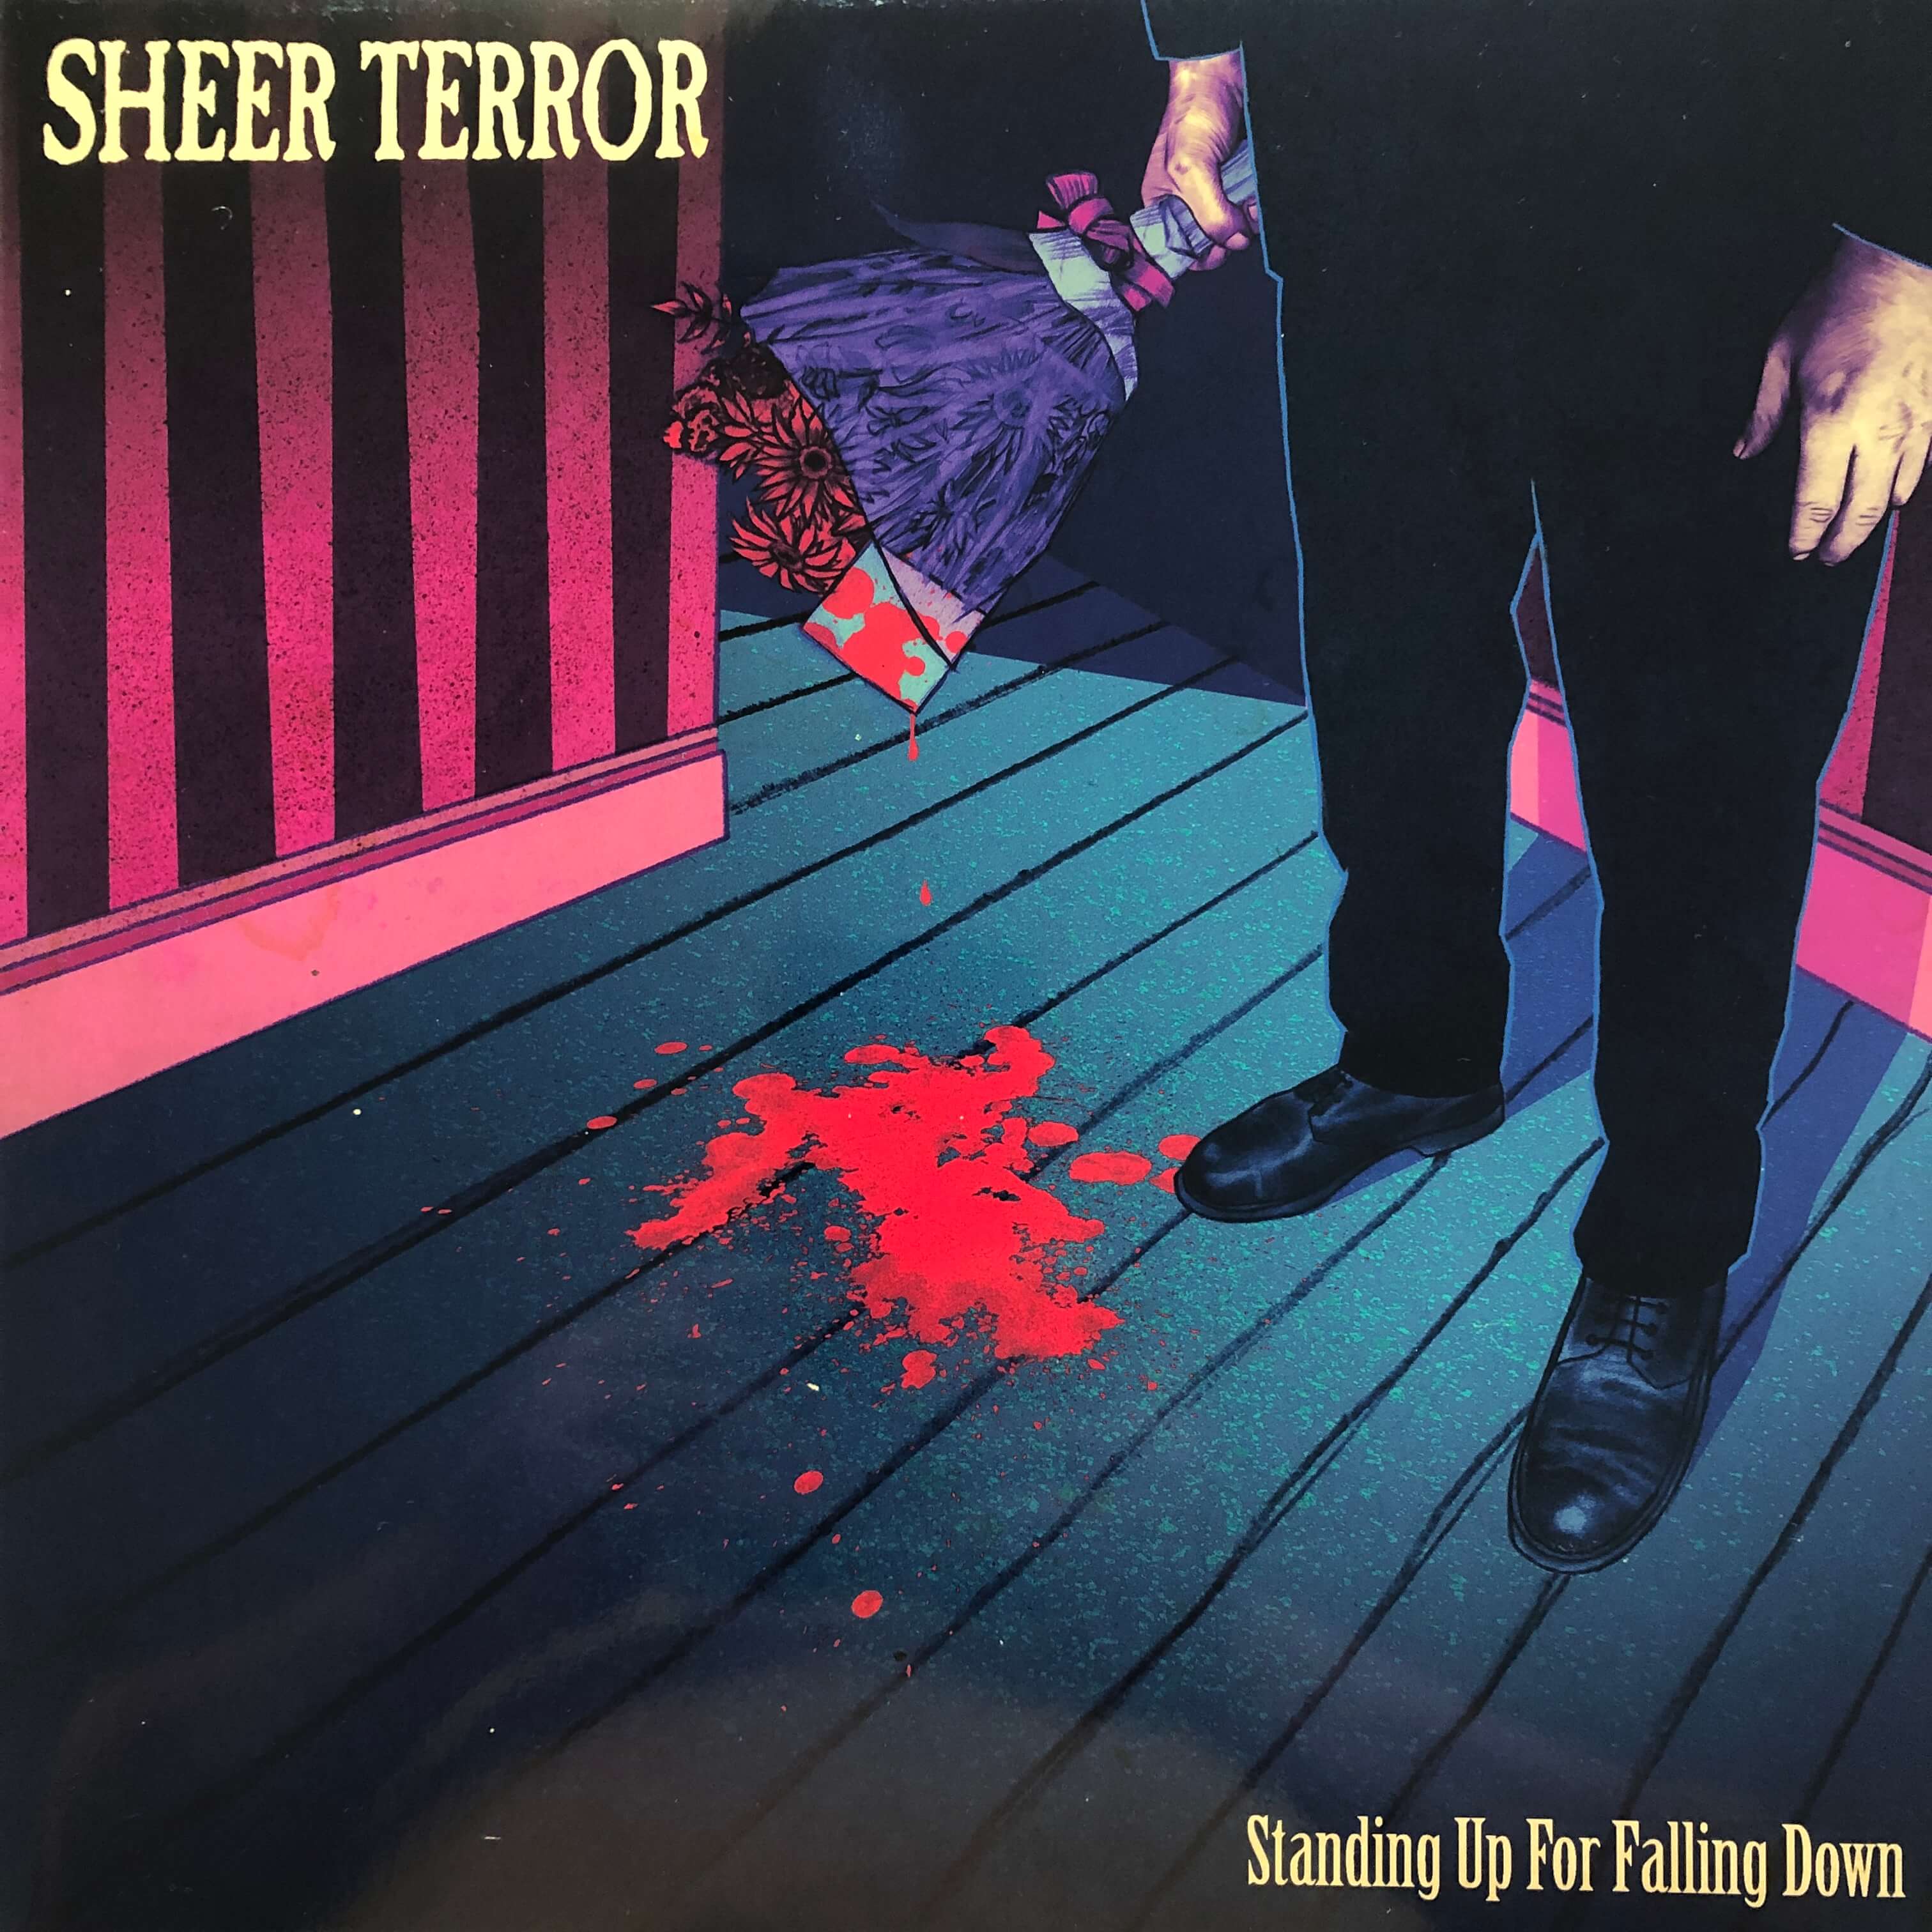 Sheer Terror "Standing Up For Falling Down" LP